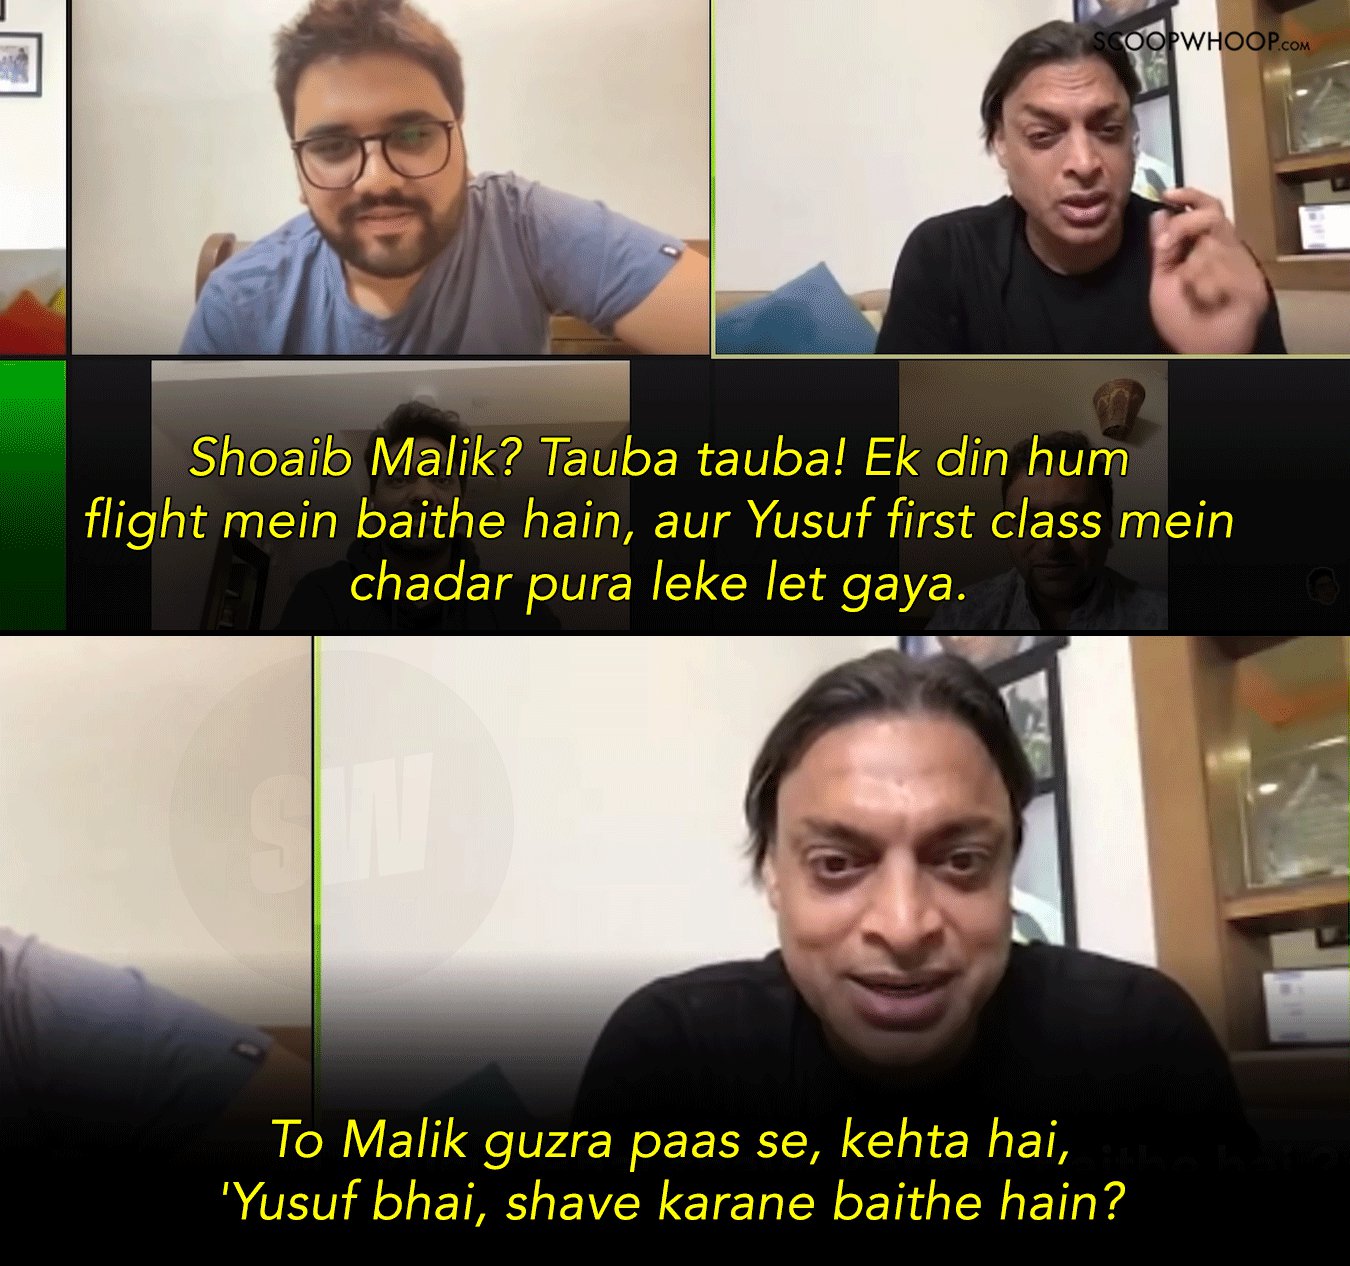 Shoaib Akhtar Joining Tanmay Bhat On YouTube Is The Funniest Thing He's  Done Since Commentary